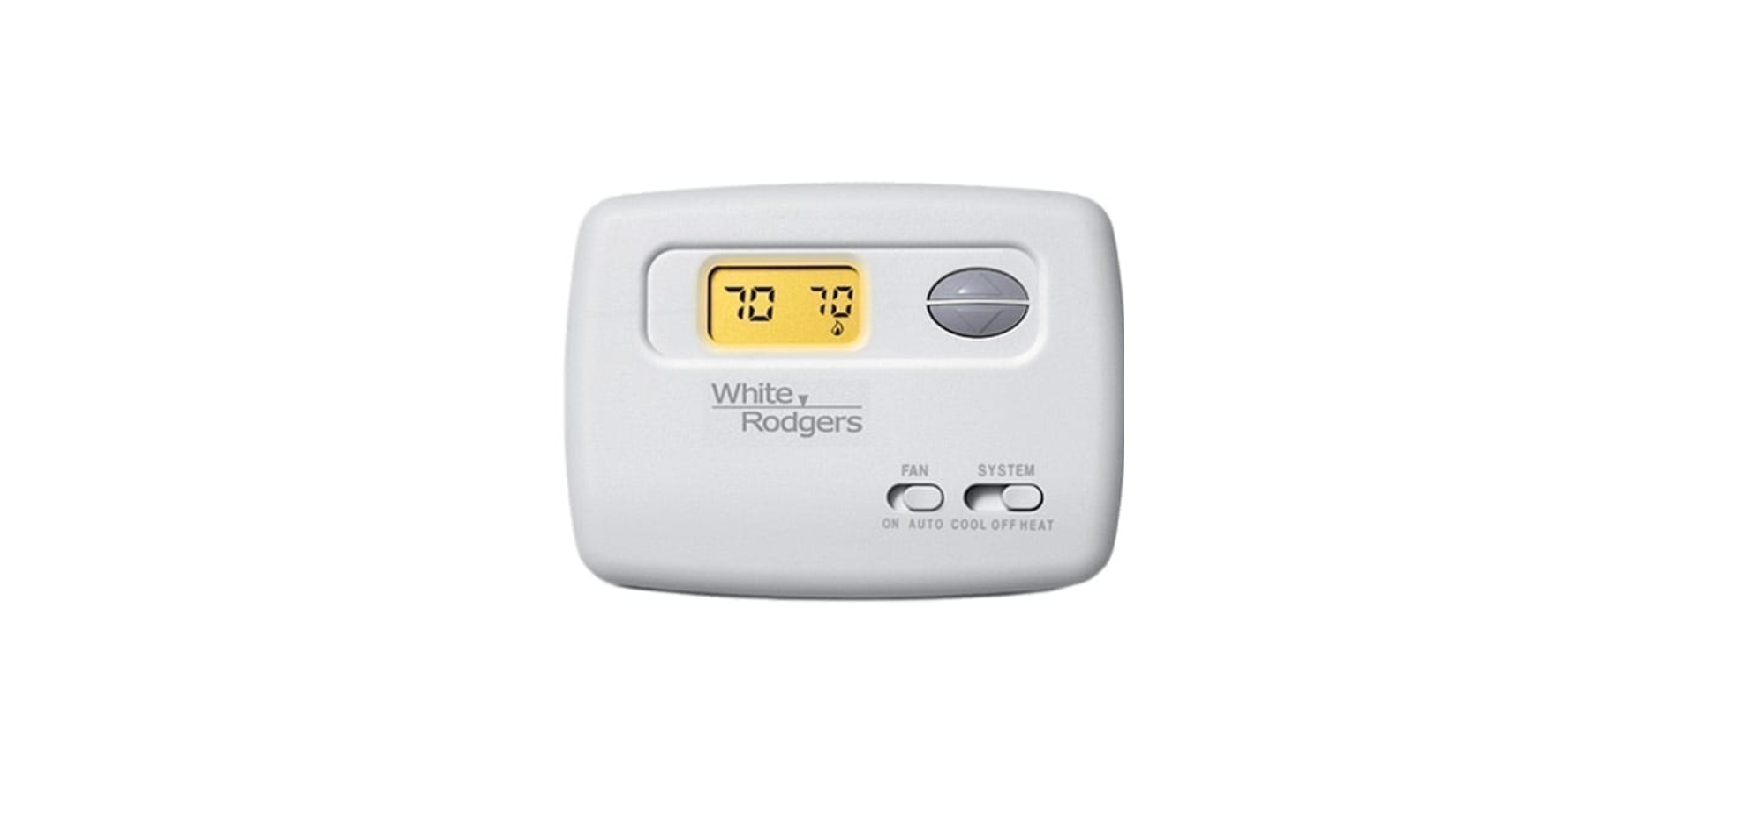 https://thermostat.guide/wp-content/uploads/2023/01/EMERSON-White-Rodgers-1F78-Non-Programmable-Thermostat-featured.png